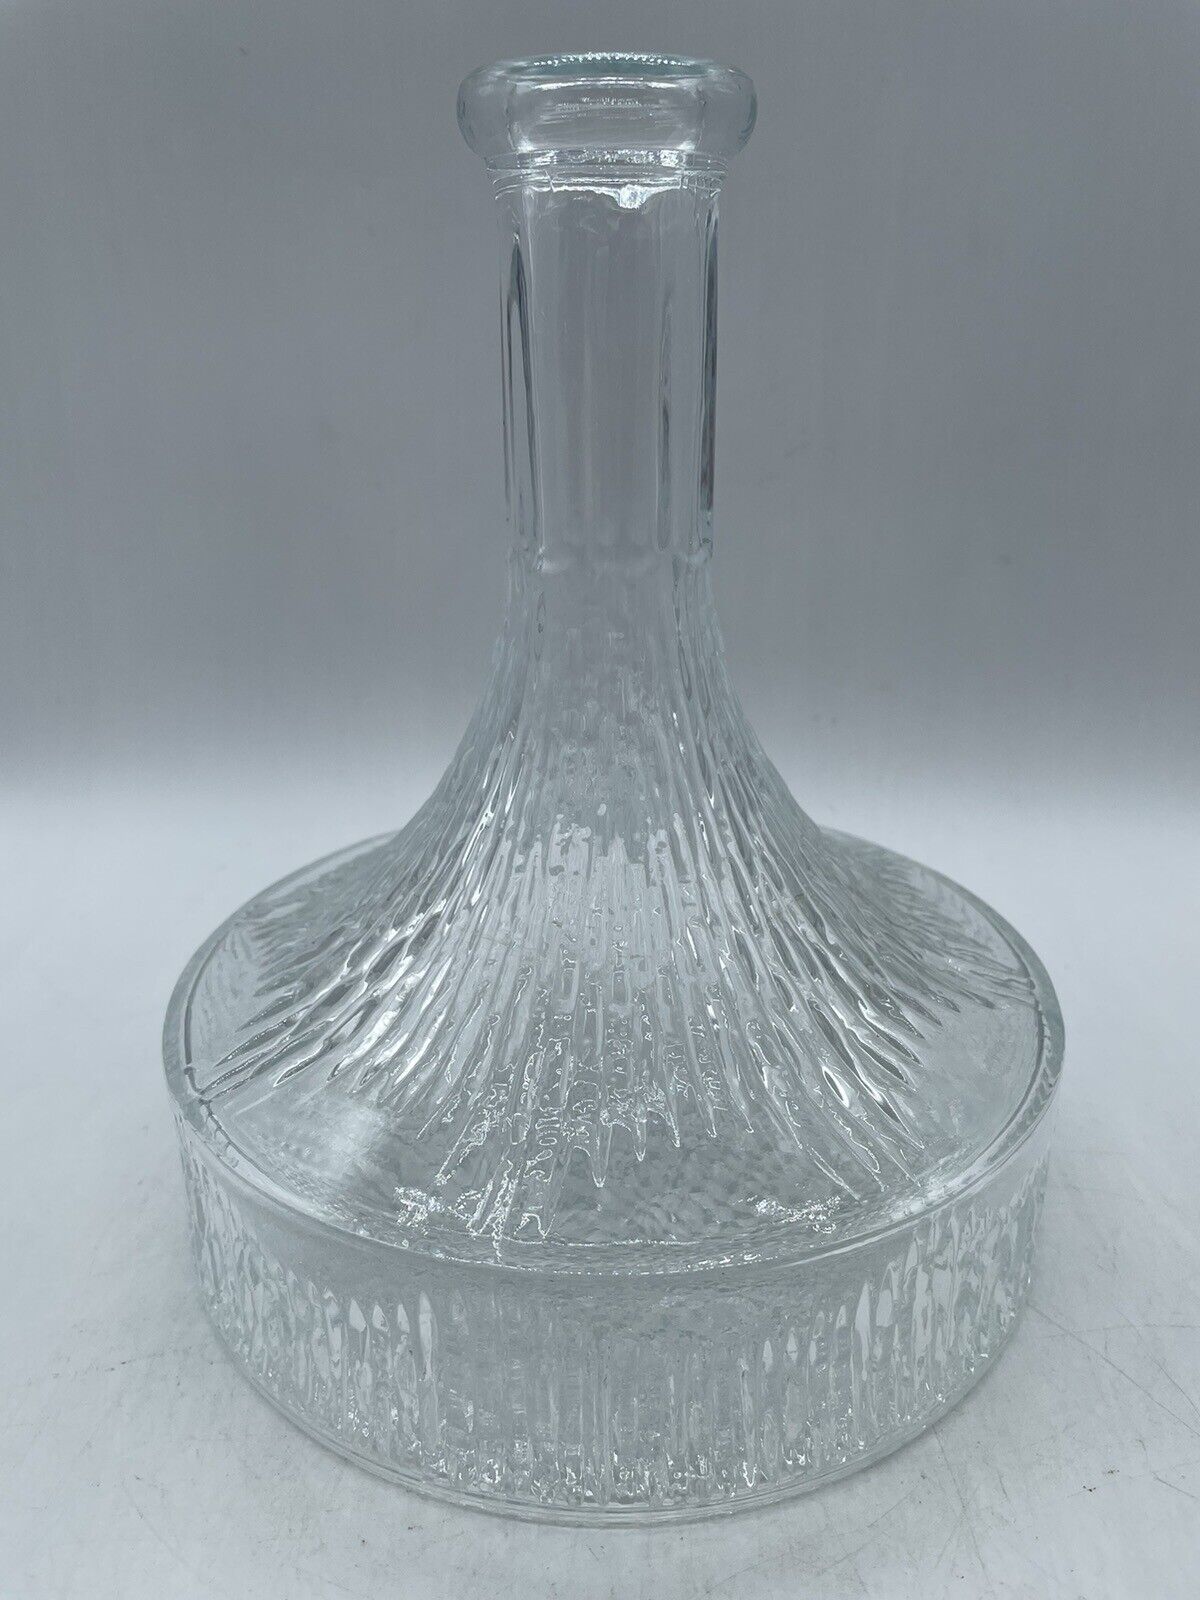 Vintage Oberglass Austria Crystal Glass Decanter Without Stopper-Unused